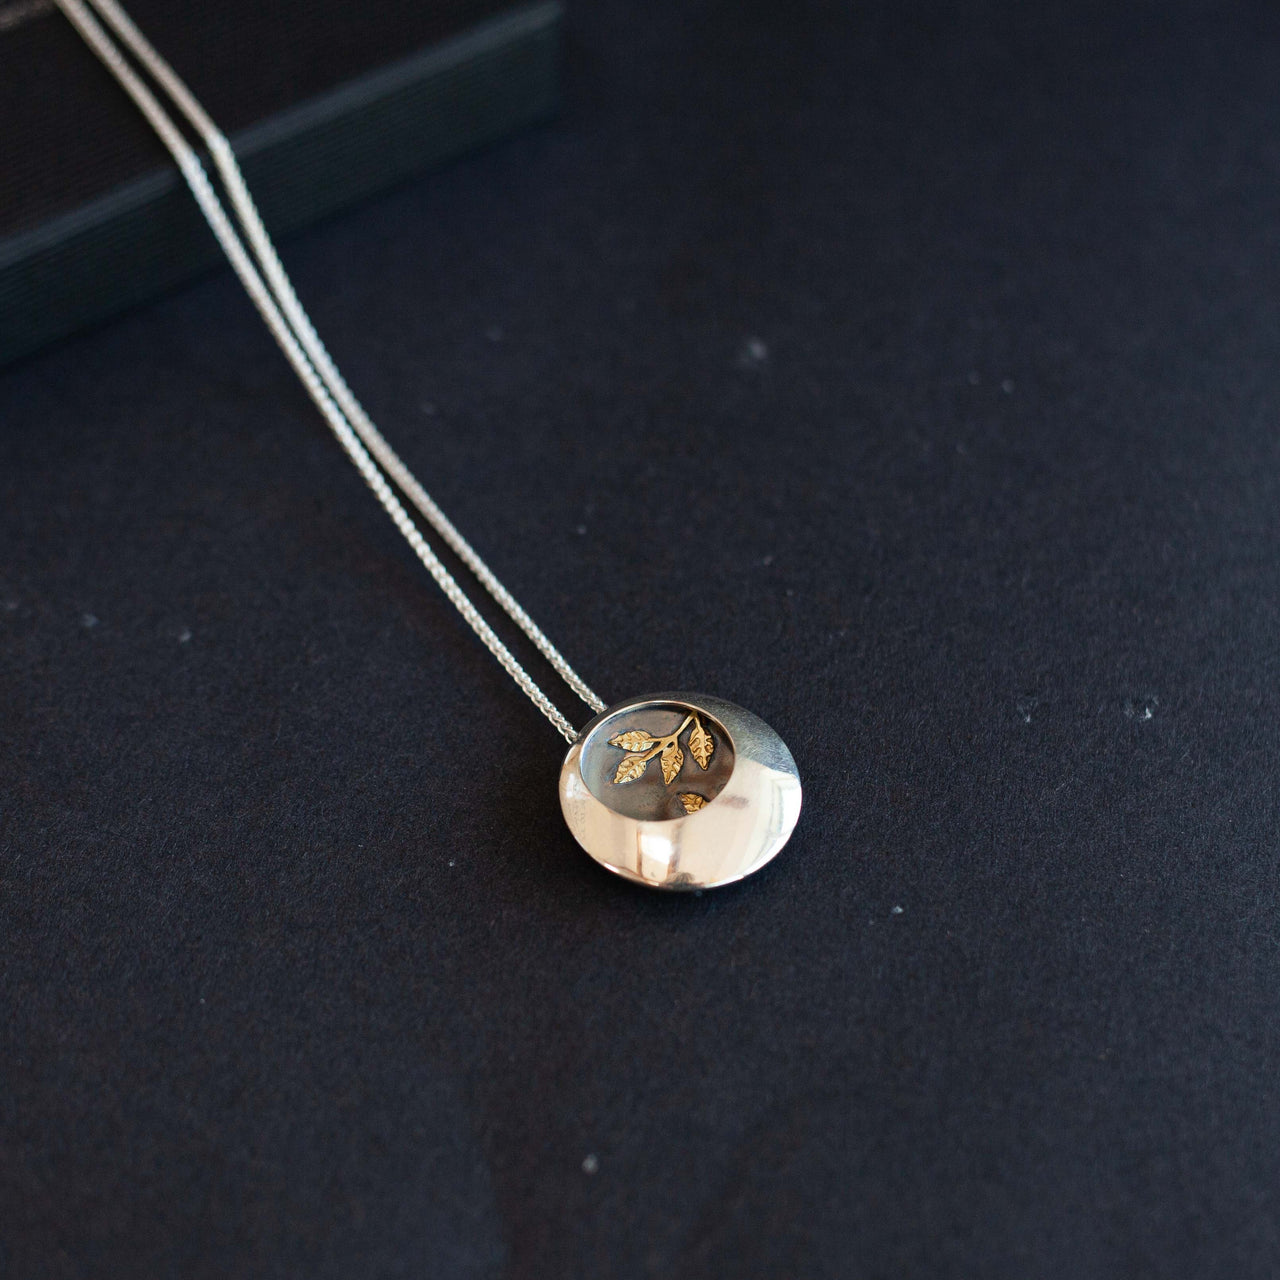 Beverly Bartlett - Golden Ratio Pendant, Oxidised with Leaf Pattern